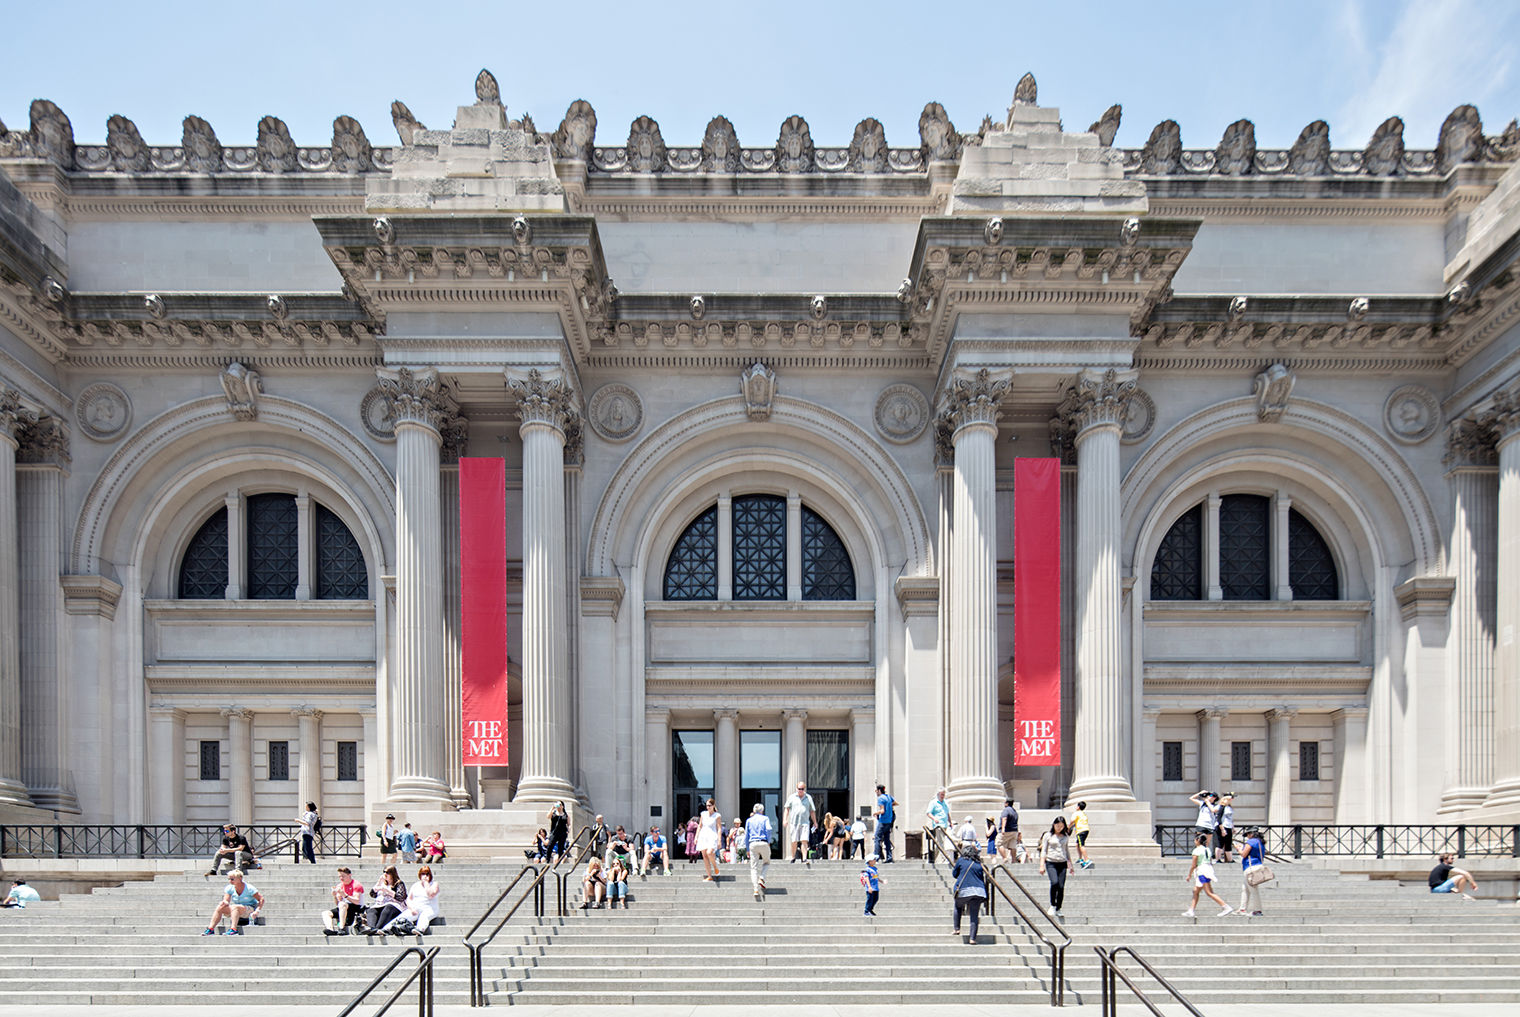 View of The Met facade, looking up from the exterior steps at 5th Ave. The building's columns, arched windows, and architectural treatment along the roofline are dramatic and imposing.